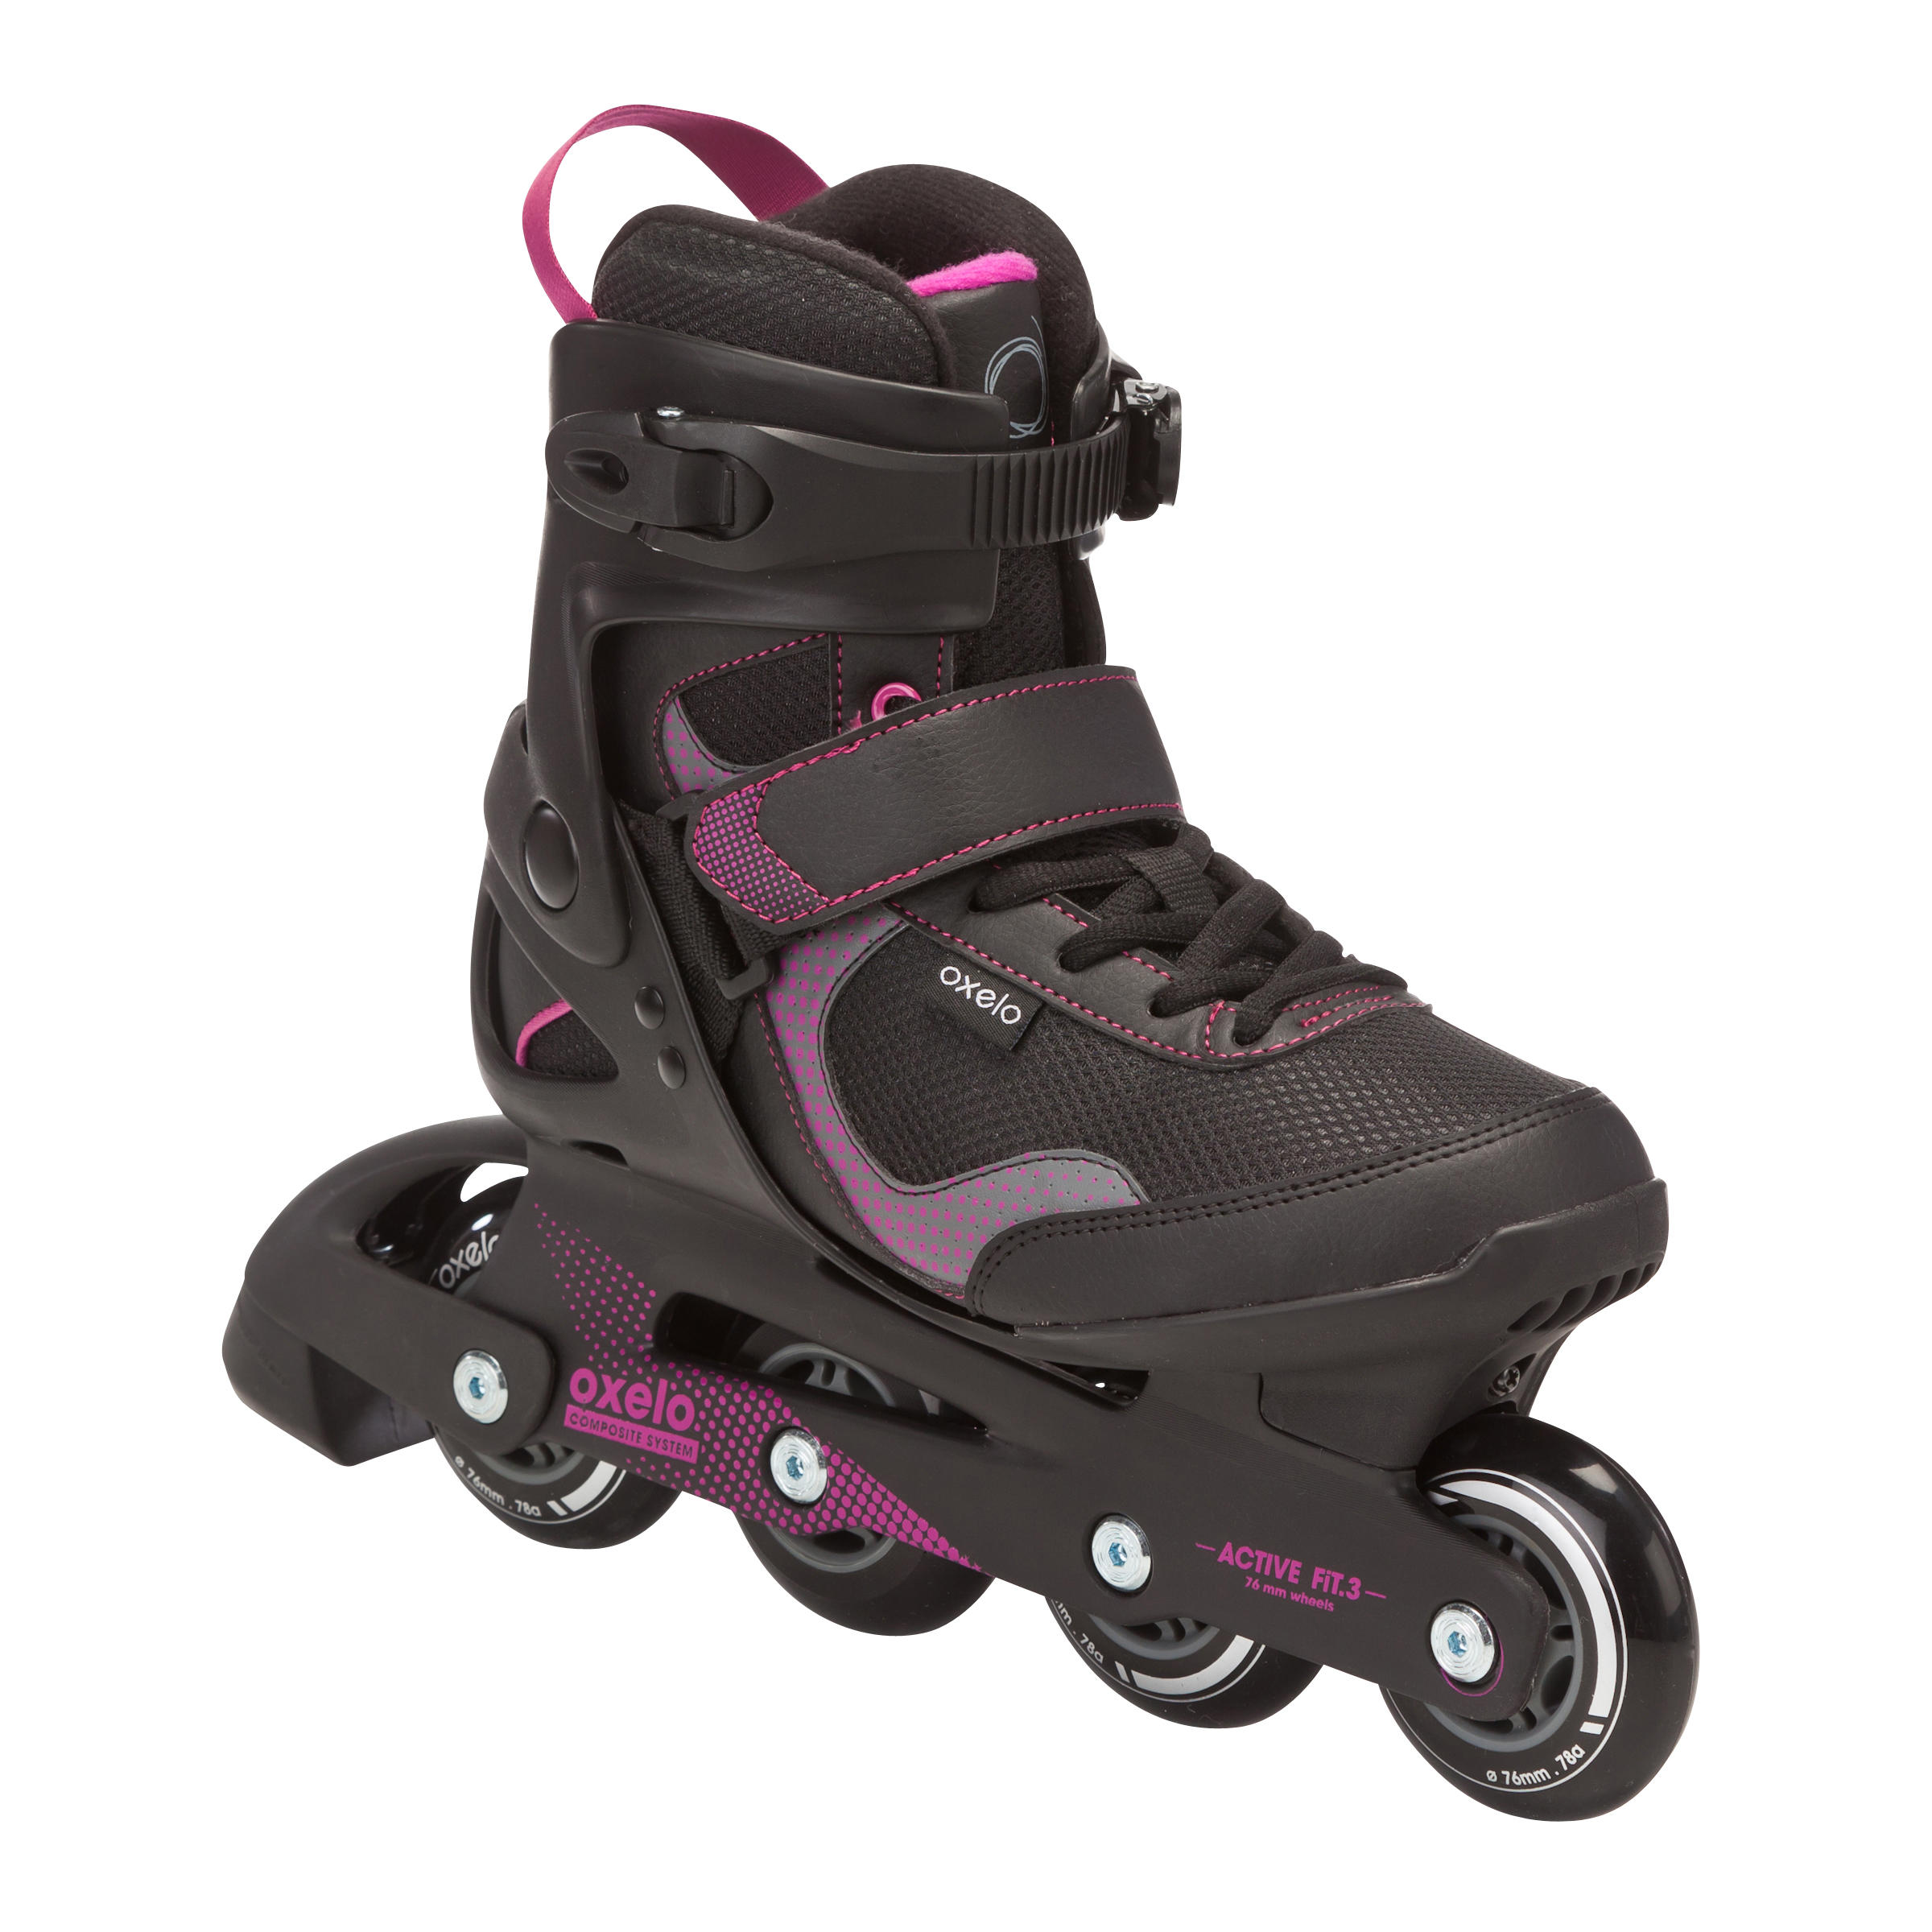 Fit3 Women's Roller Skating Shoes|Buy 